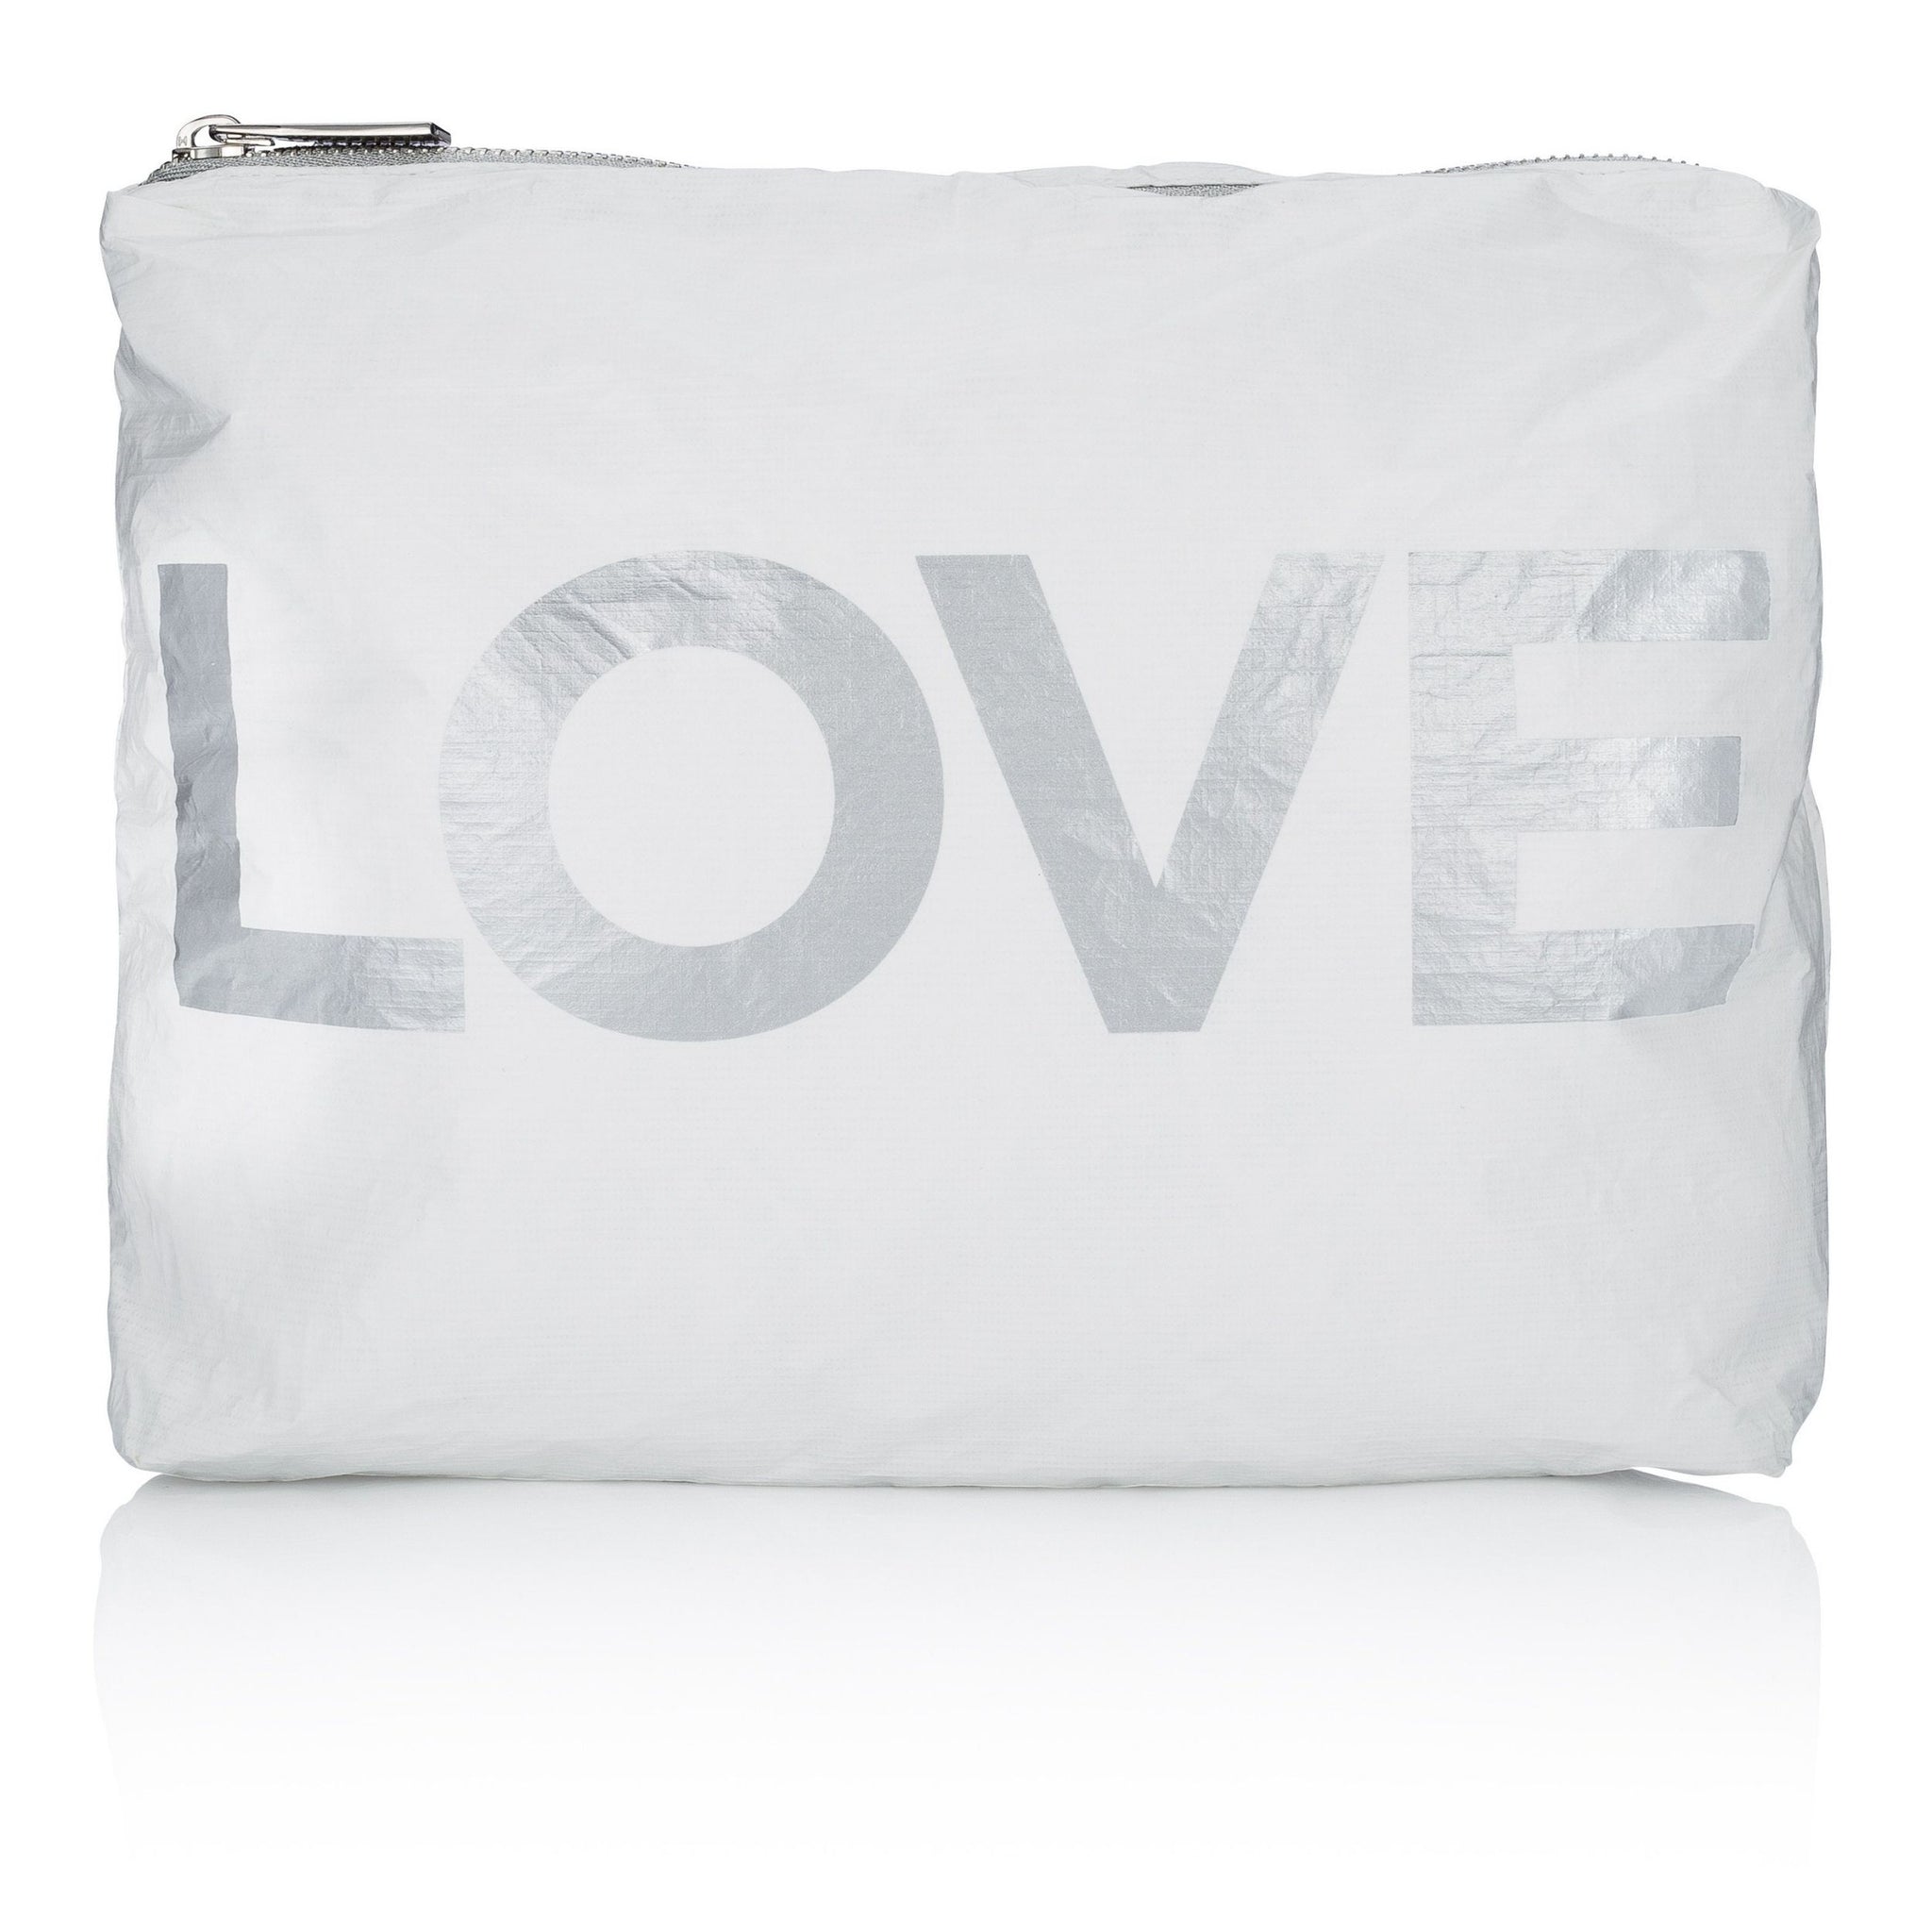 Shimmer white with silver "LOVE" medium zipper pack